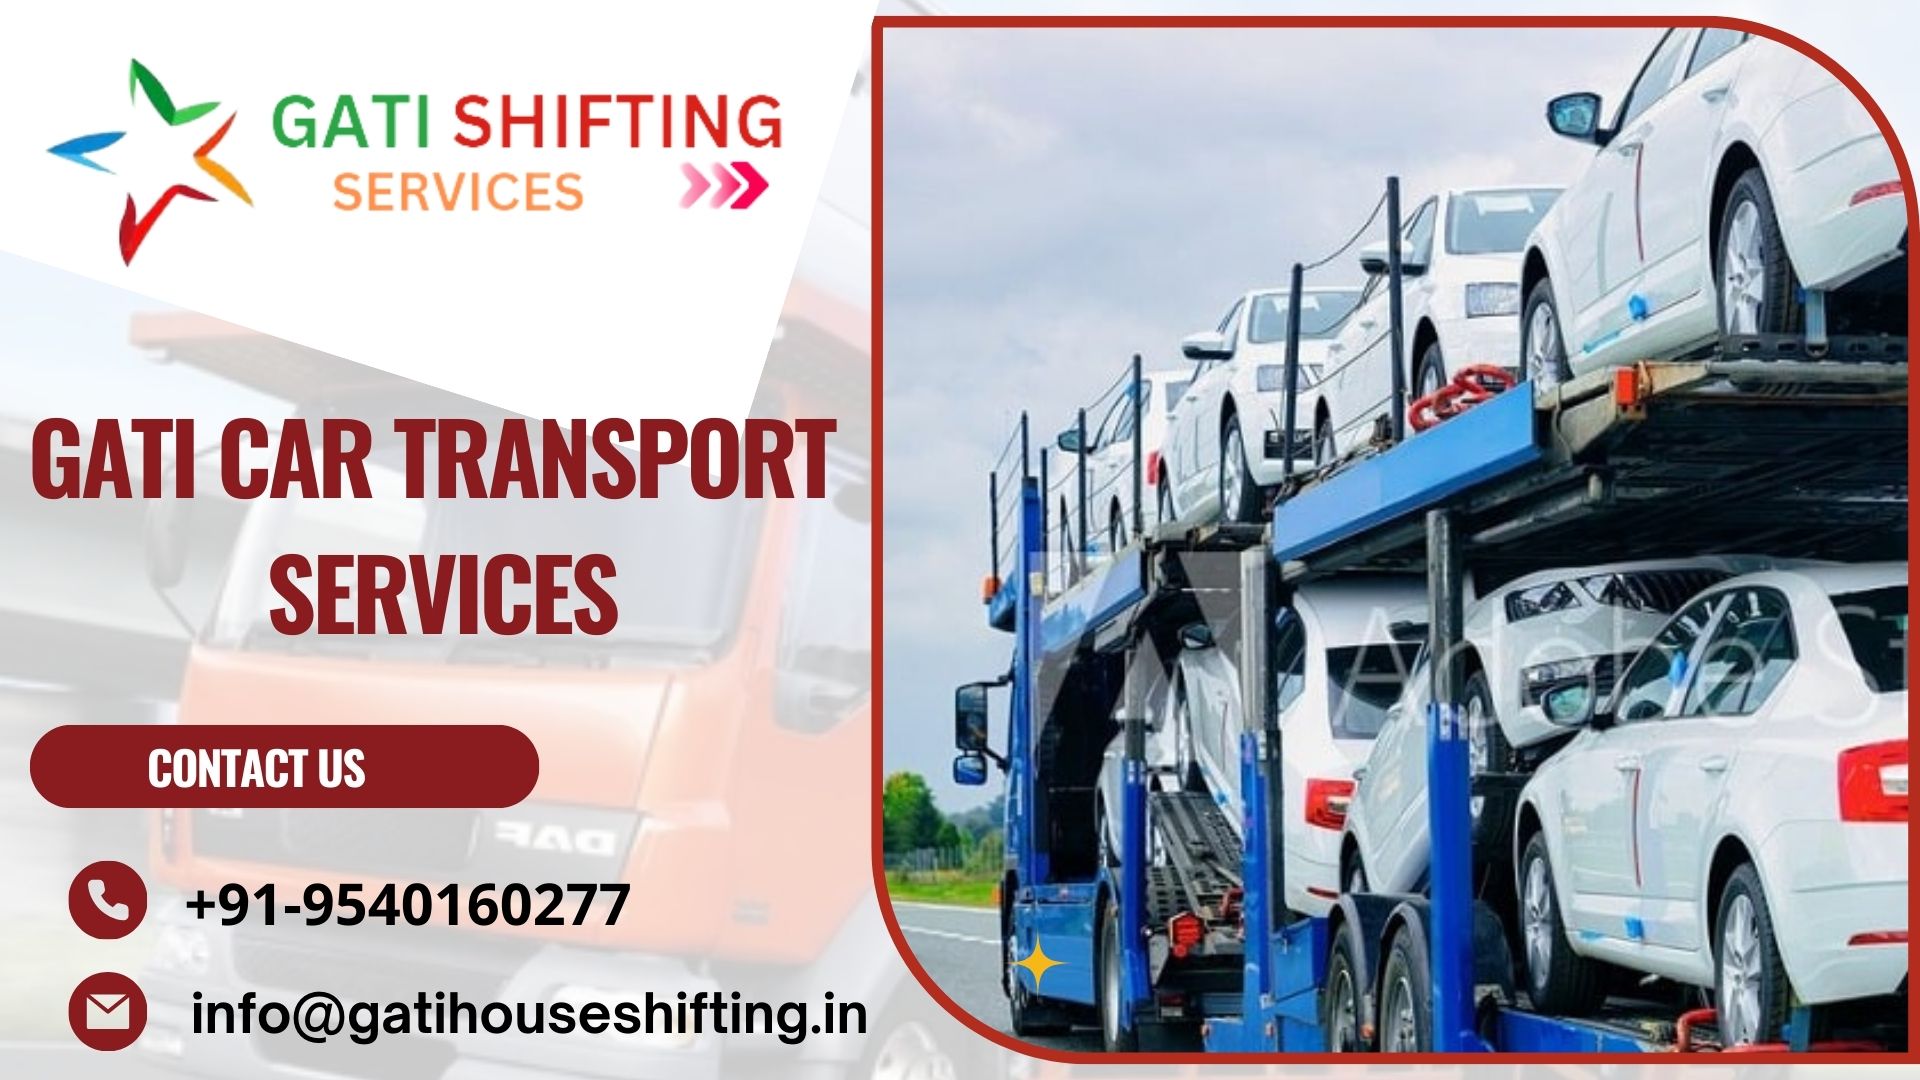 Car transport services from Delhi to Coimbatore